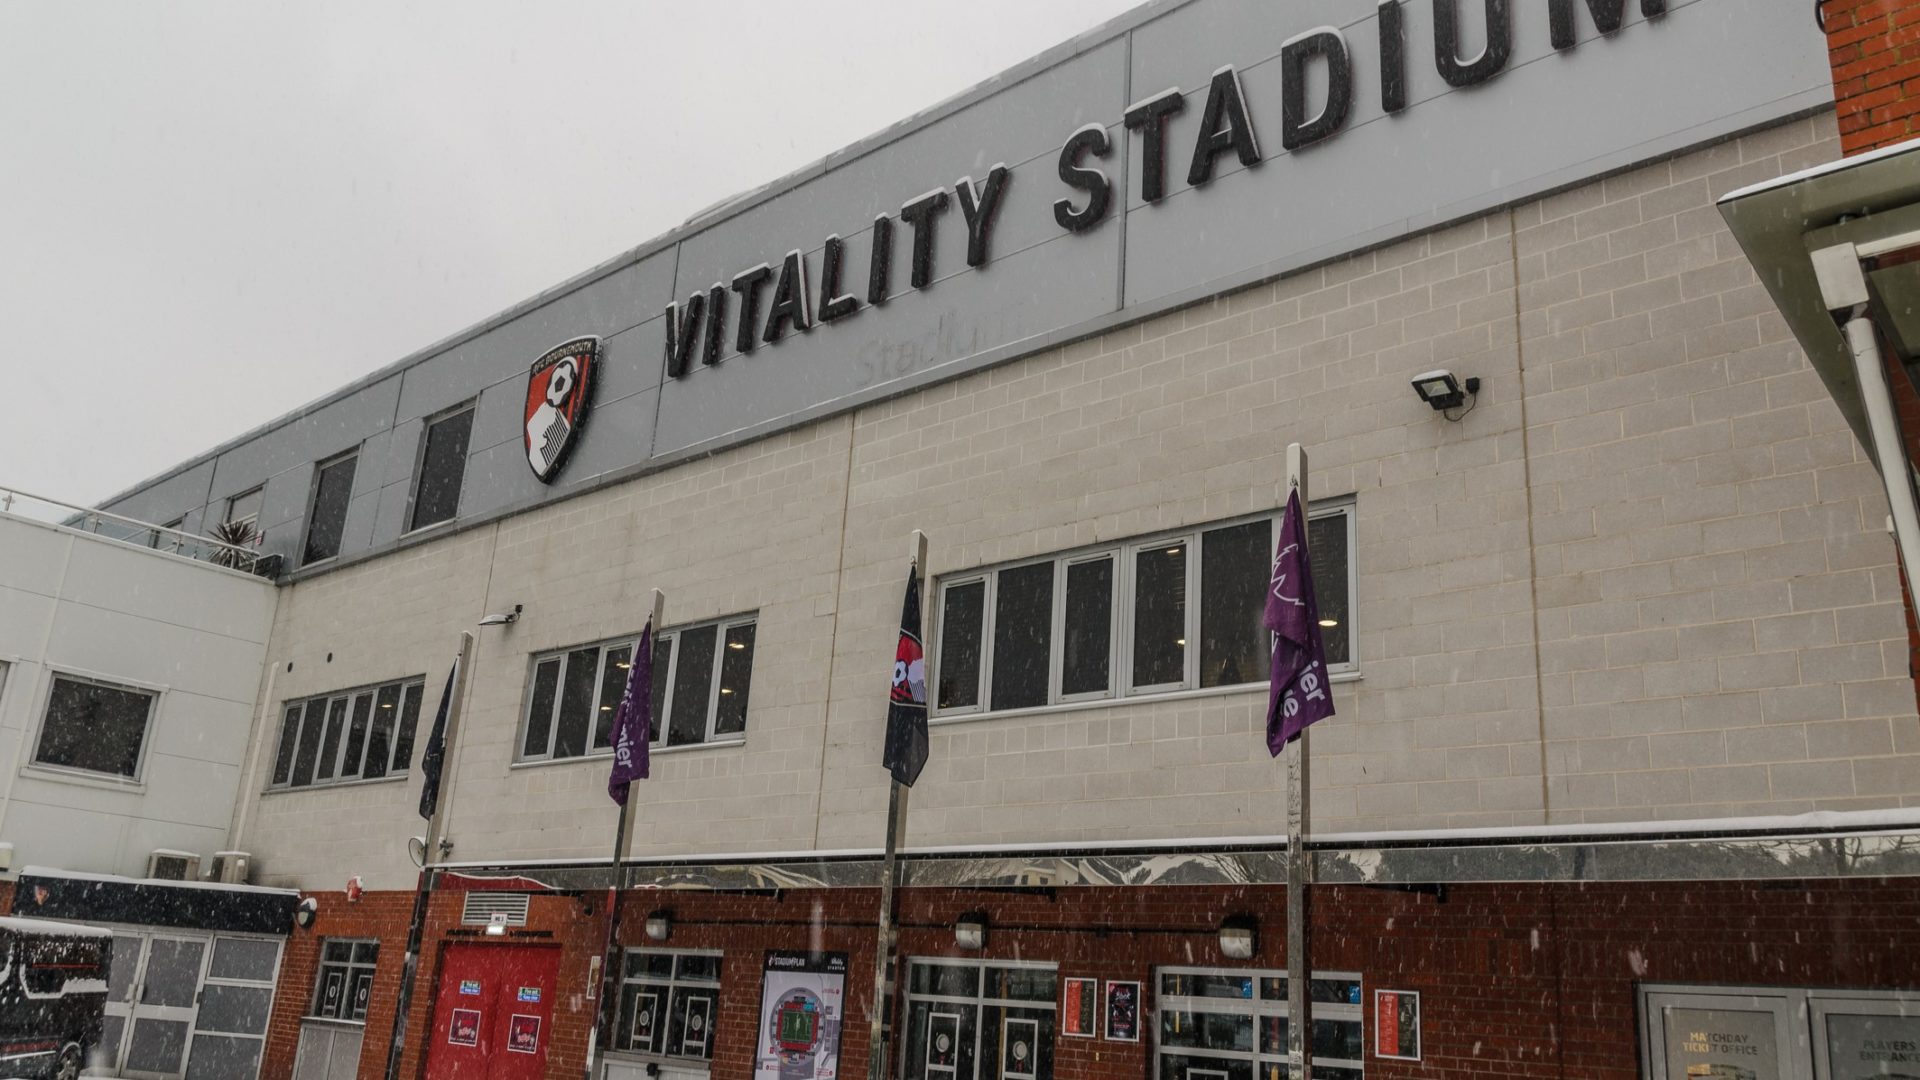 The Vitality Stadium is the smallest in the Premier League (image: Dreamstime).